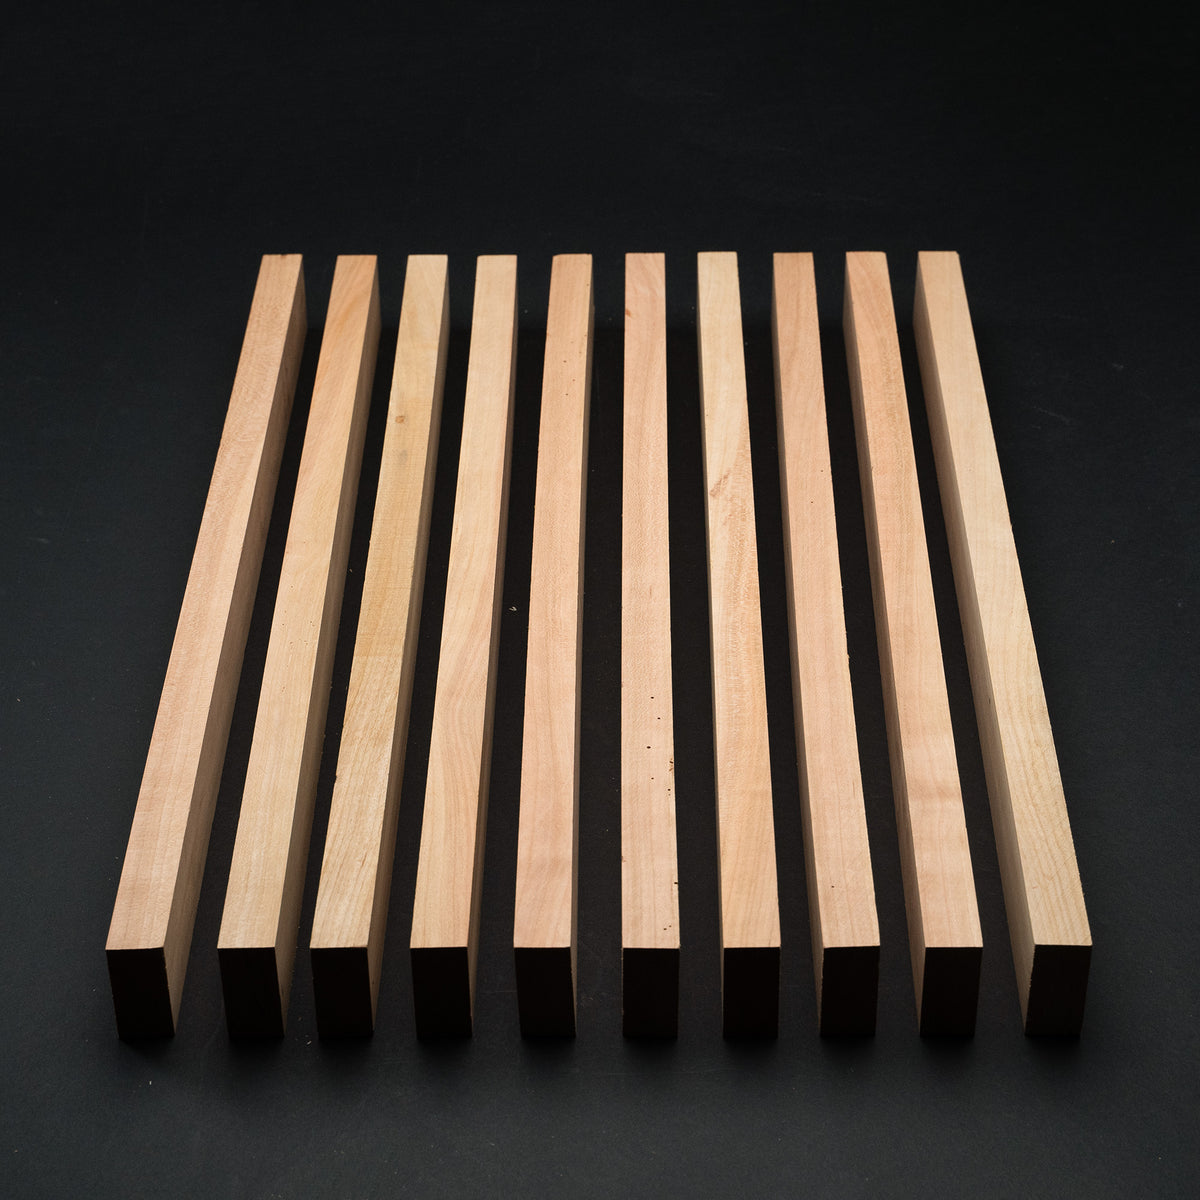 3/4&quot; x 2&quot; x 24&quot; Cherry Boards - Pack of 5, 10, 15 or 20 - DIY Cutting Charcuterie Cheese Boards Tray - Kiln Dried